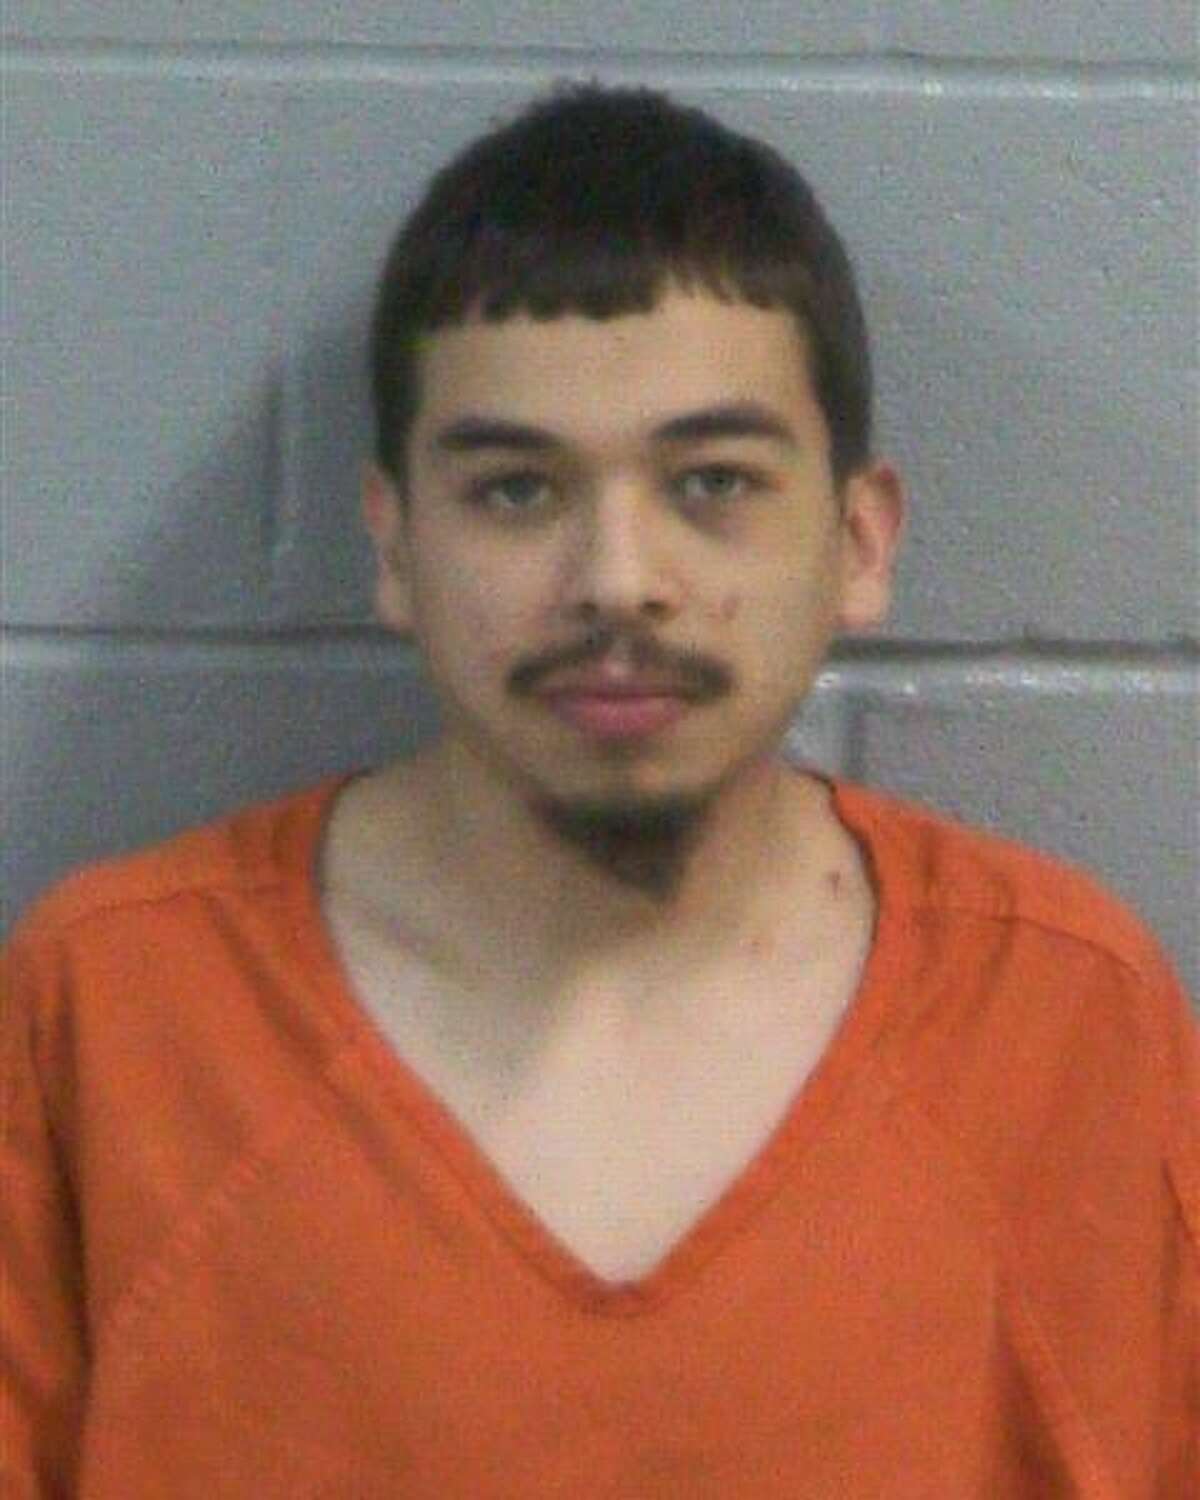 Javier Saenz, 20, was arrested Friday, March 25, 2021 for spitting at a Midland police officer’s face.